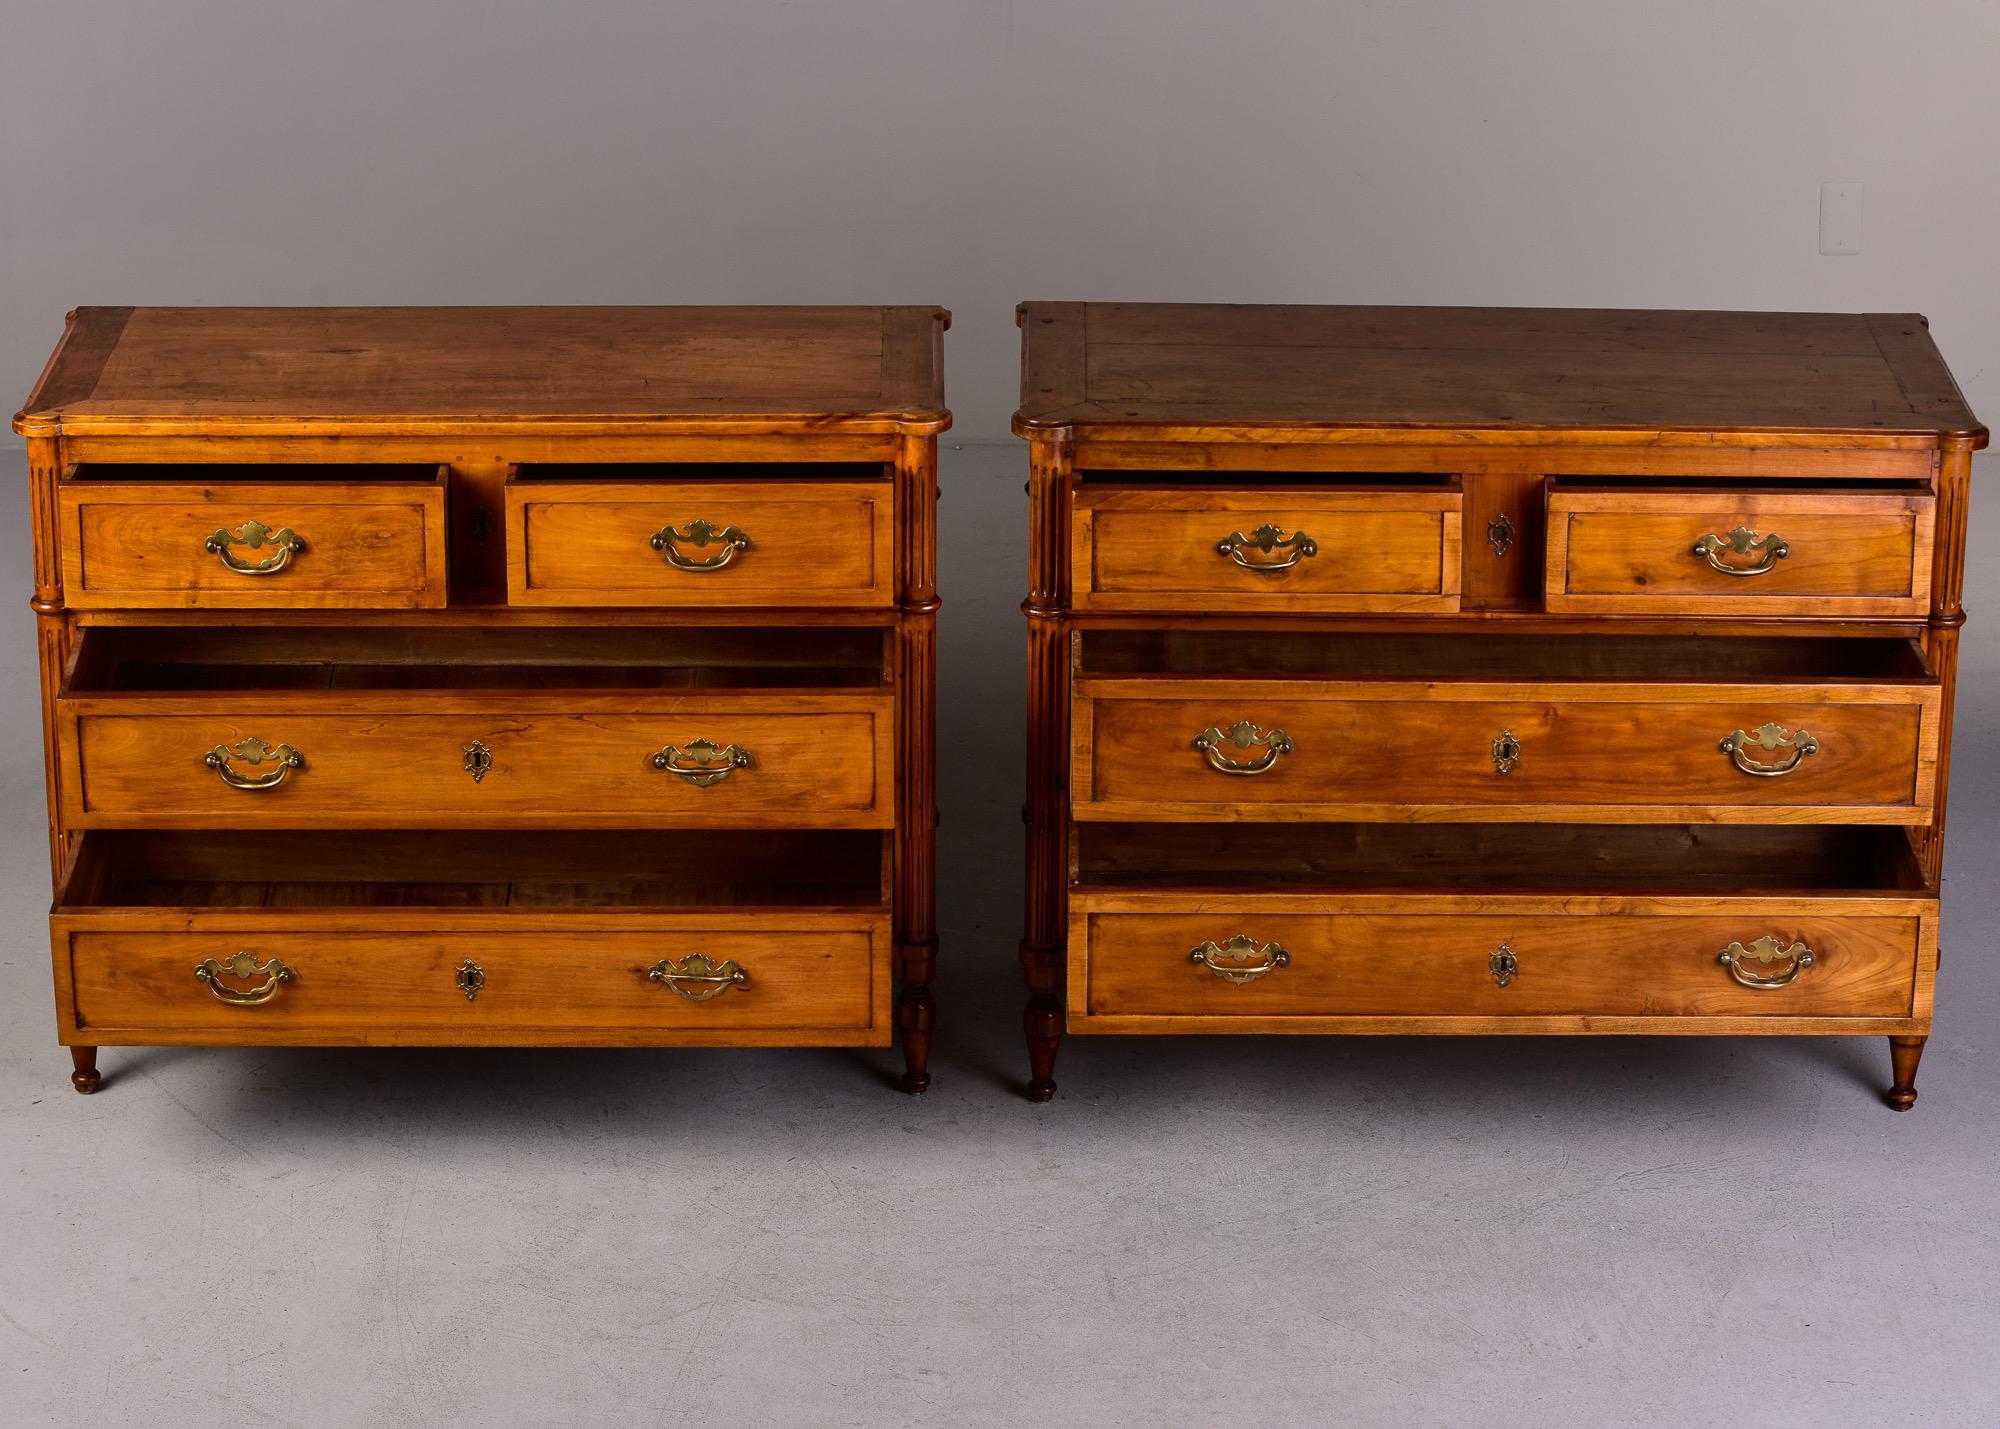 Turned Late 19th C Near Pair of Cherry Chests of Drawers